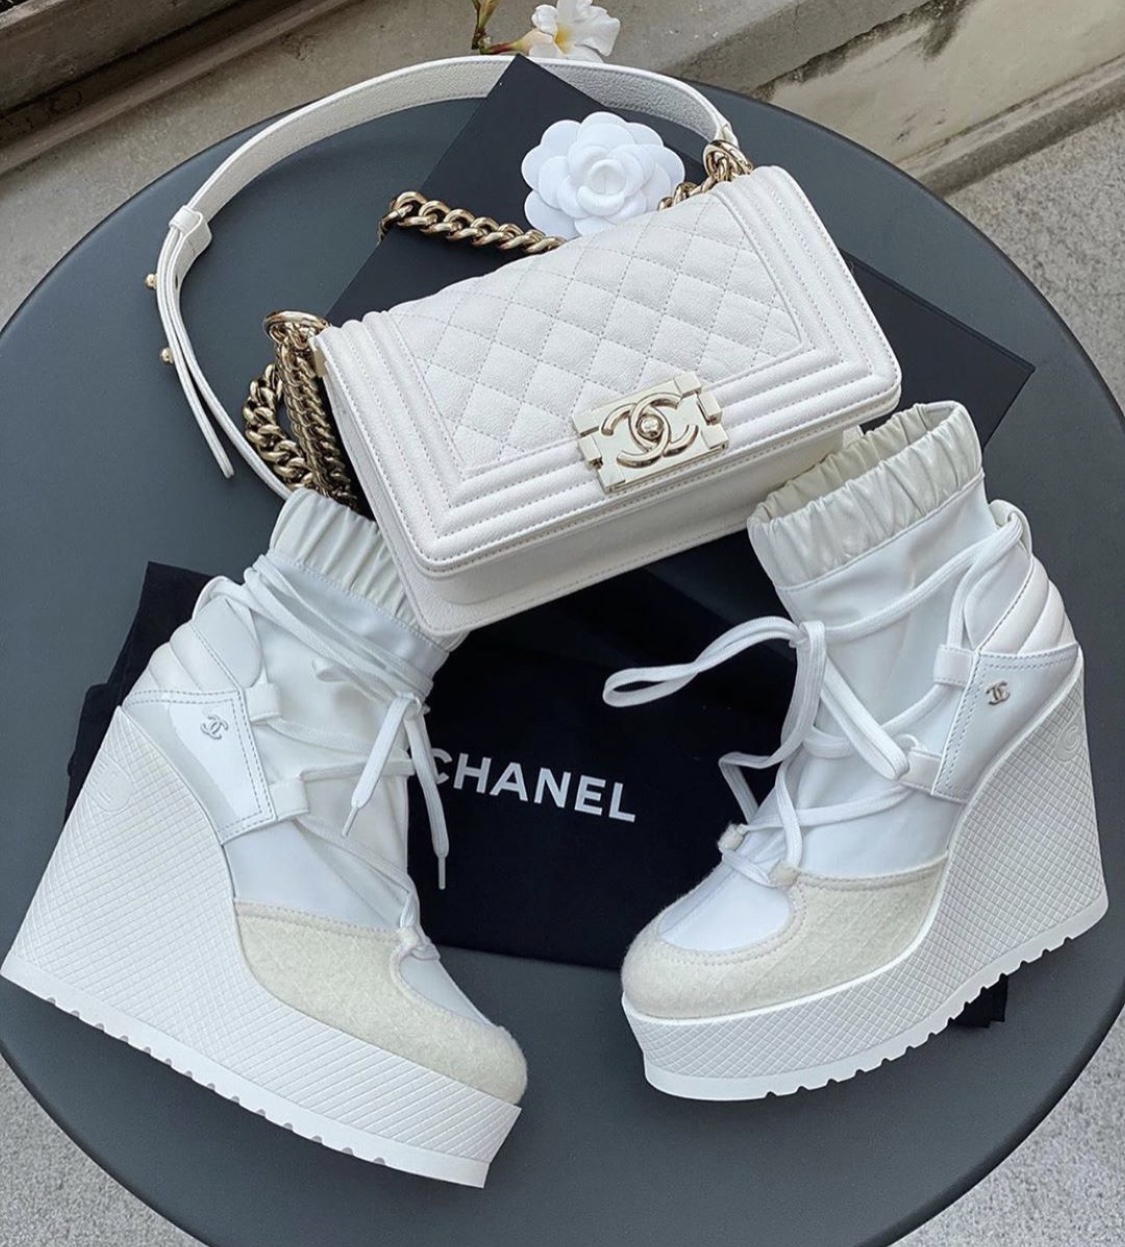 Chanel Lace Up Platform Boot 